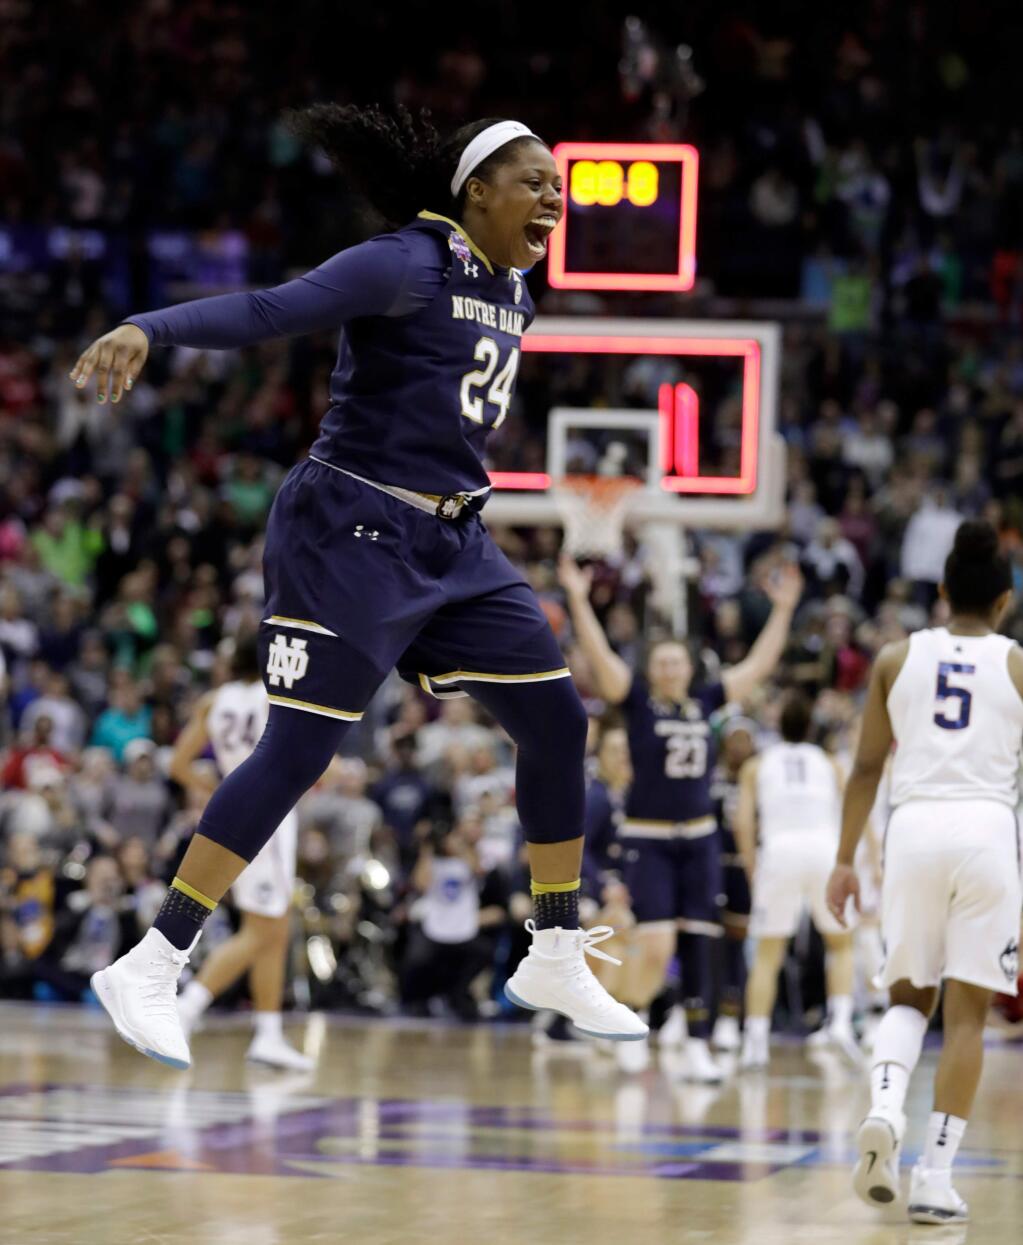 Notre Dame's Arike Ogunbowale (24) celebrates as Connecticut's Crystal Dangerfield (5) walks away as time expires in overtime in the semifinals of the women's NCAA Final Four, Friday, March 30, 2018, in Columbus, Ohio. Notre Dame won 91-89. (AP Photo/Tony Dejak)